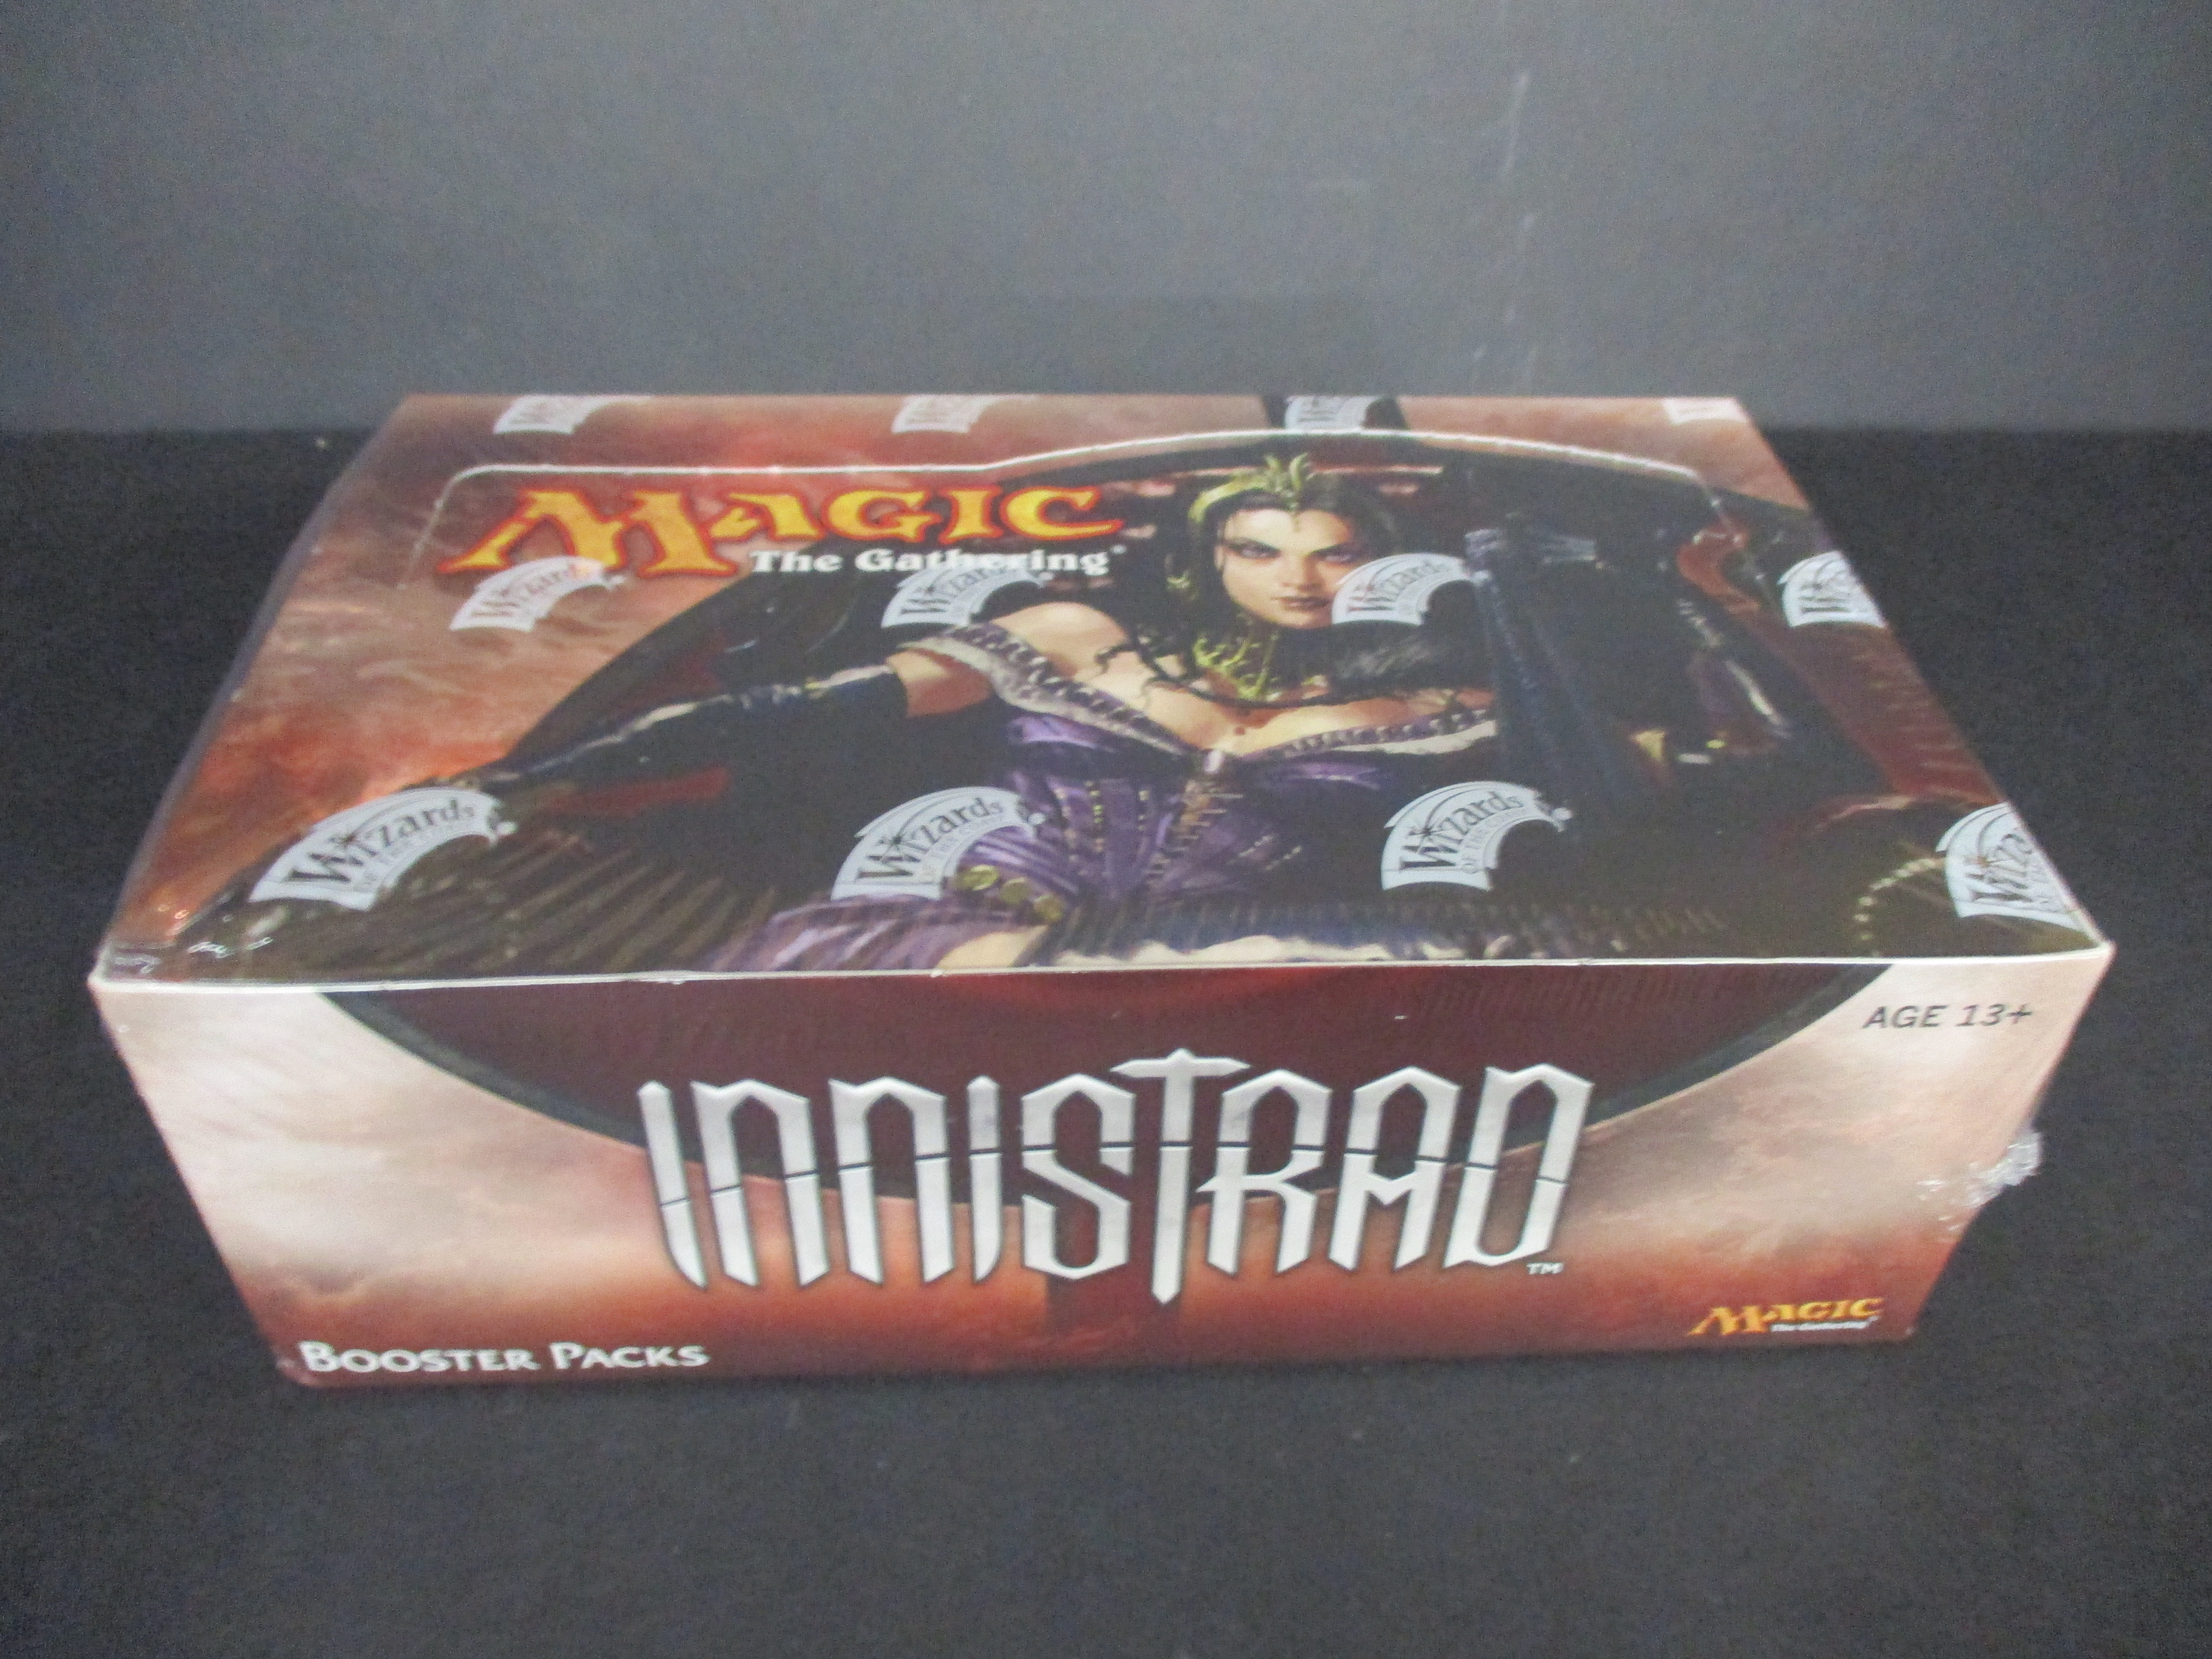 Innistrad Booster Pack Hard To Find Blister Pack! Magic the Gathering Sealed 